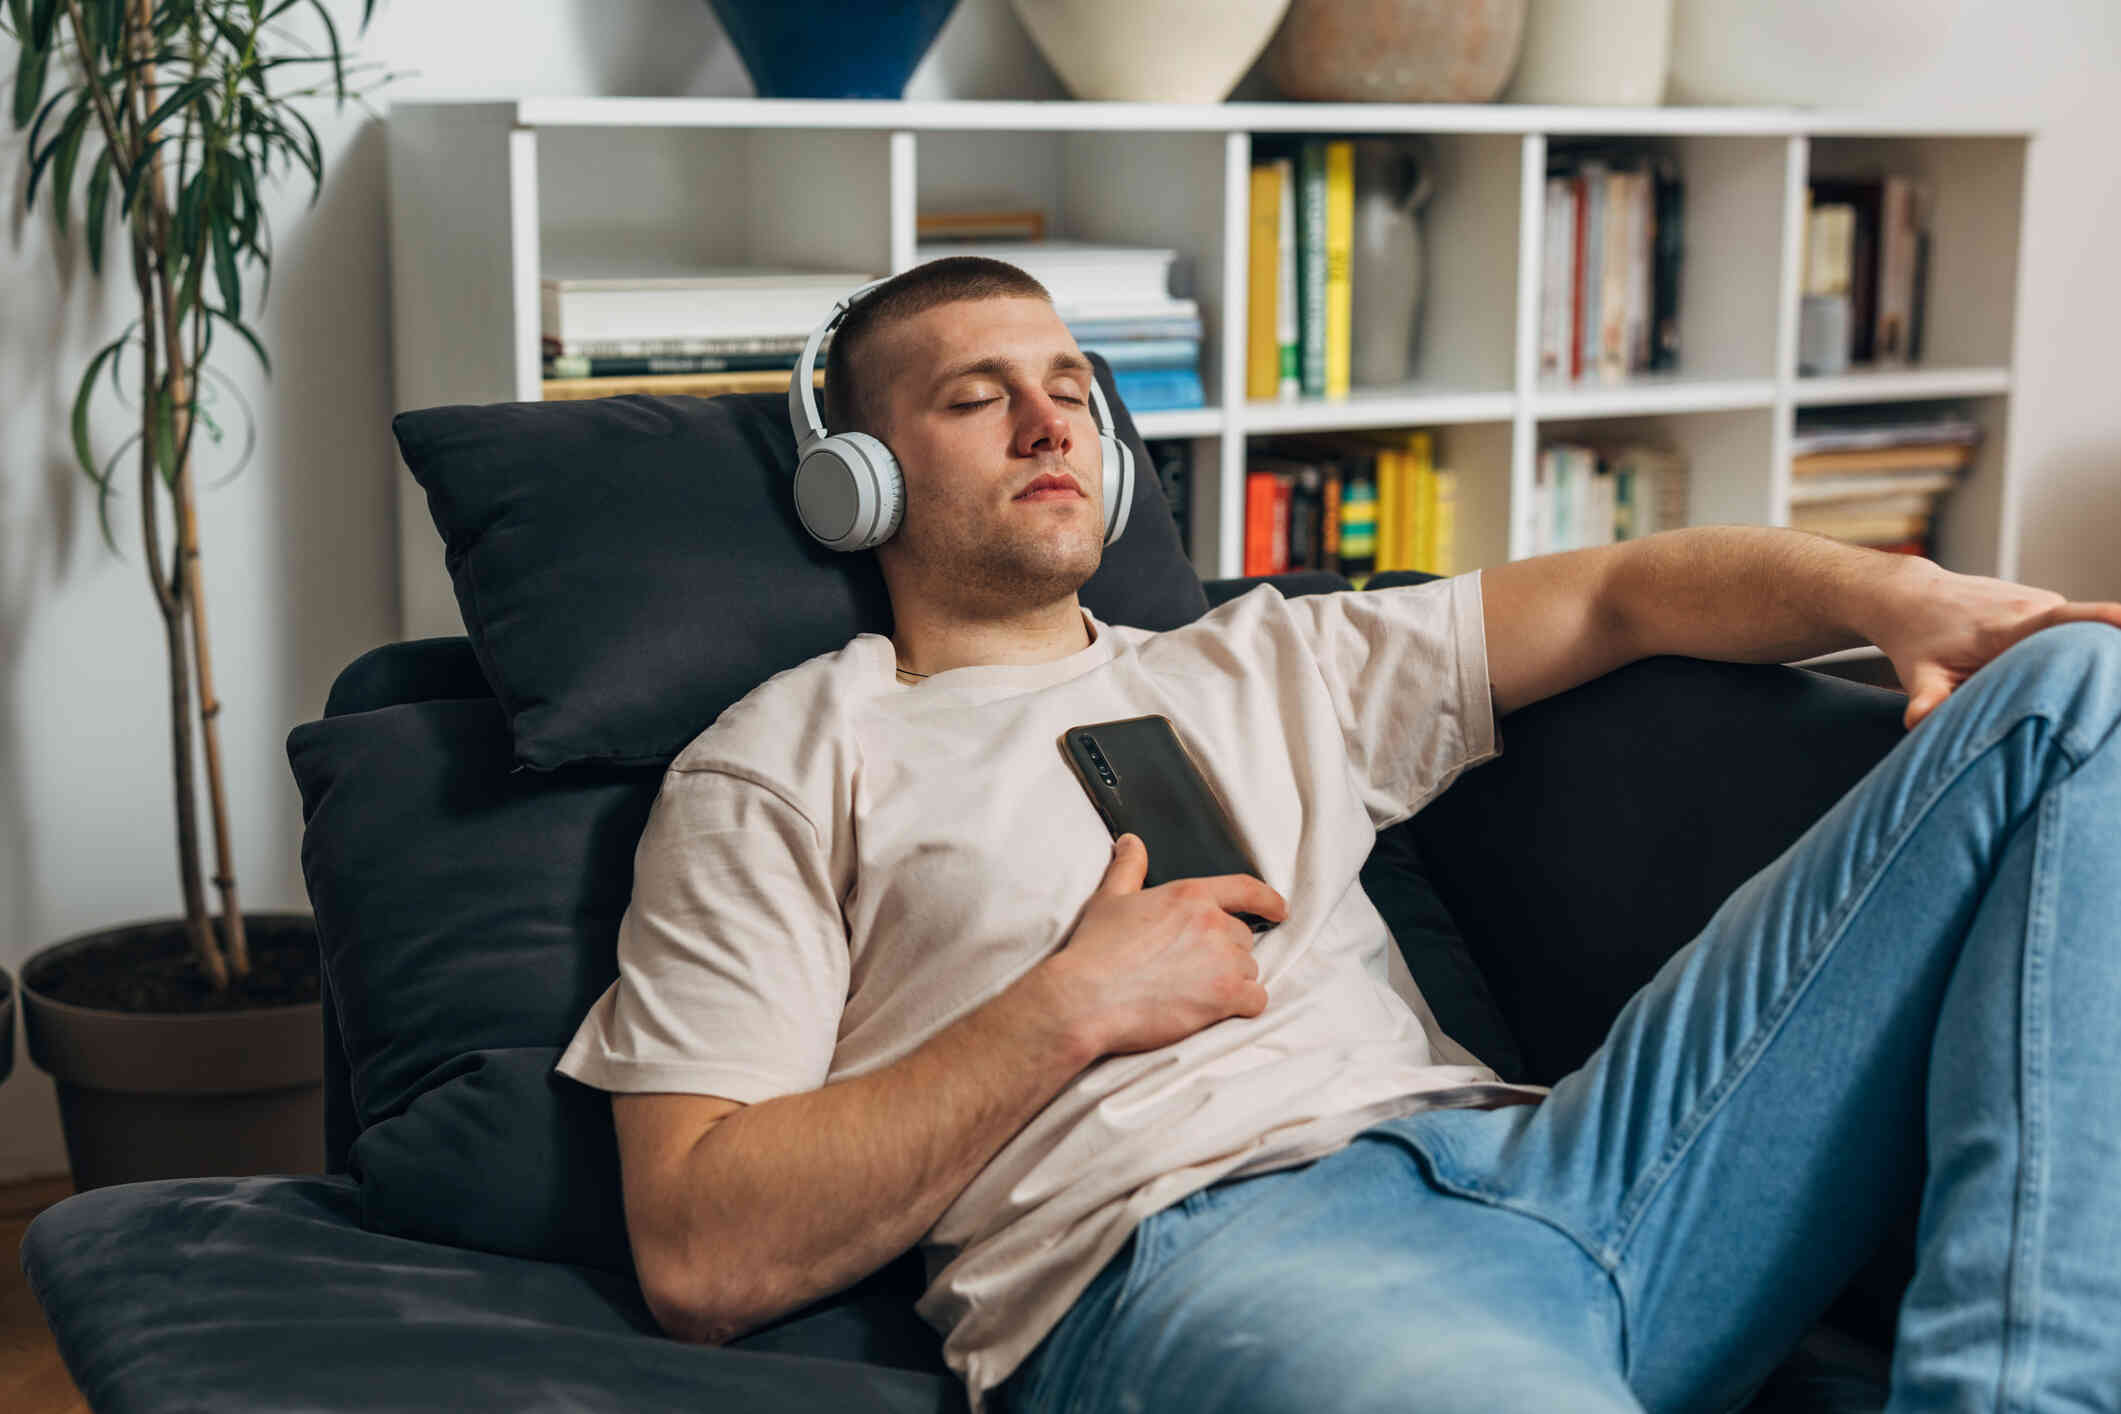 A man reclines on his black couch with his eyes closed while wearing white headphones and resting a phone on his chest.